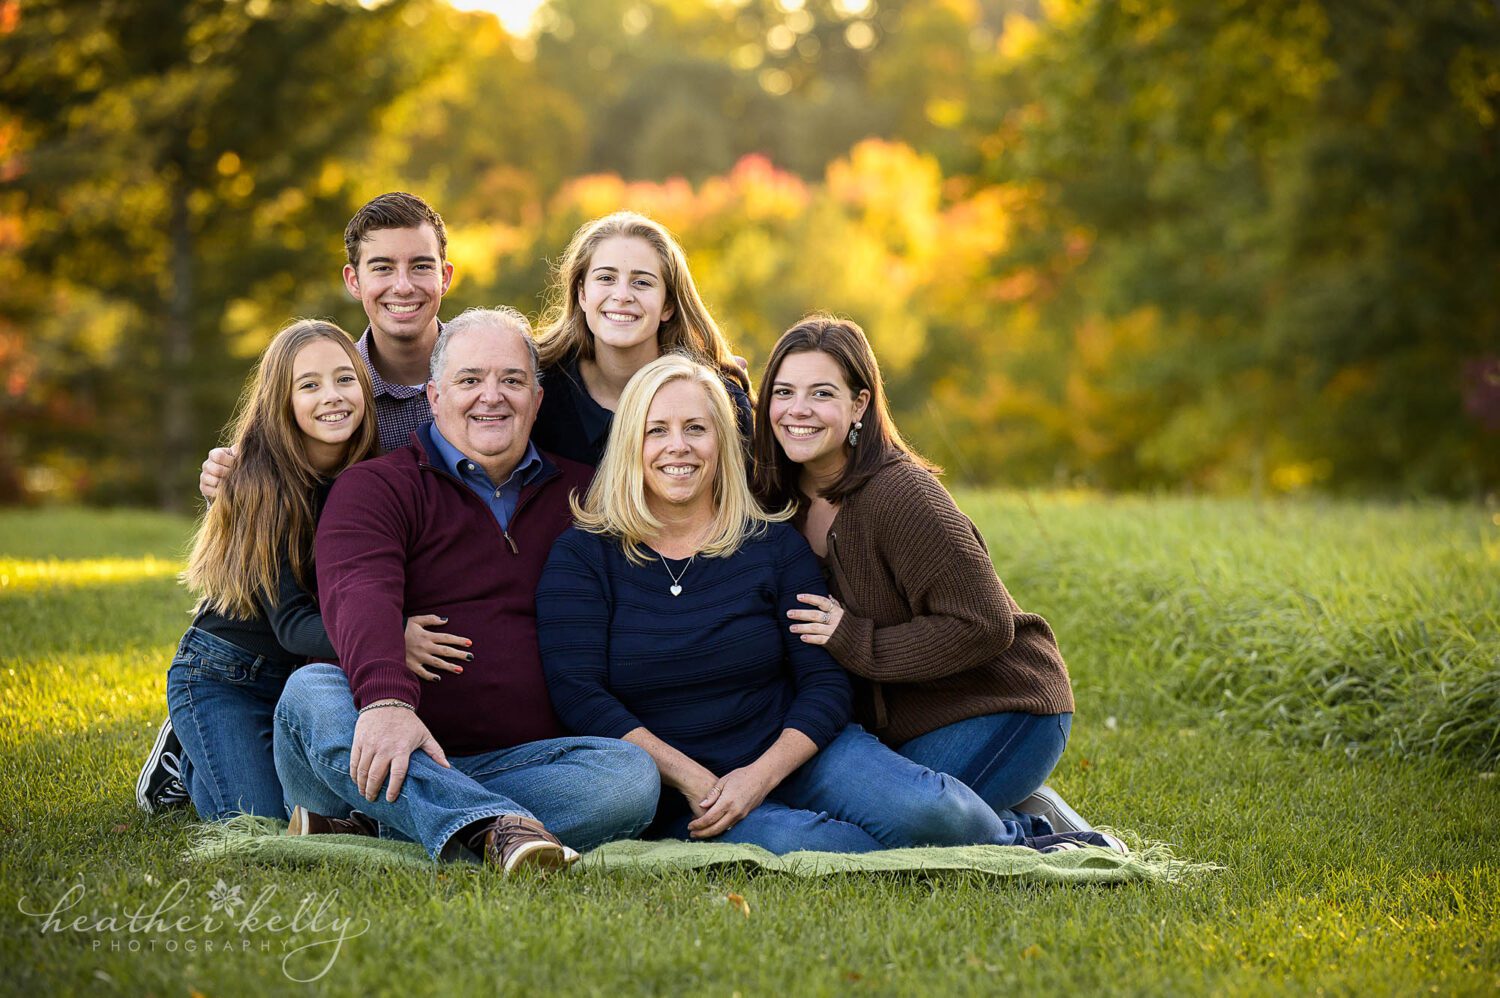 sandy hook ct family photography session. A portrait of a family of 6 sitting in the grass and smiling. 